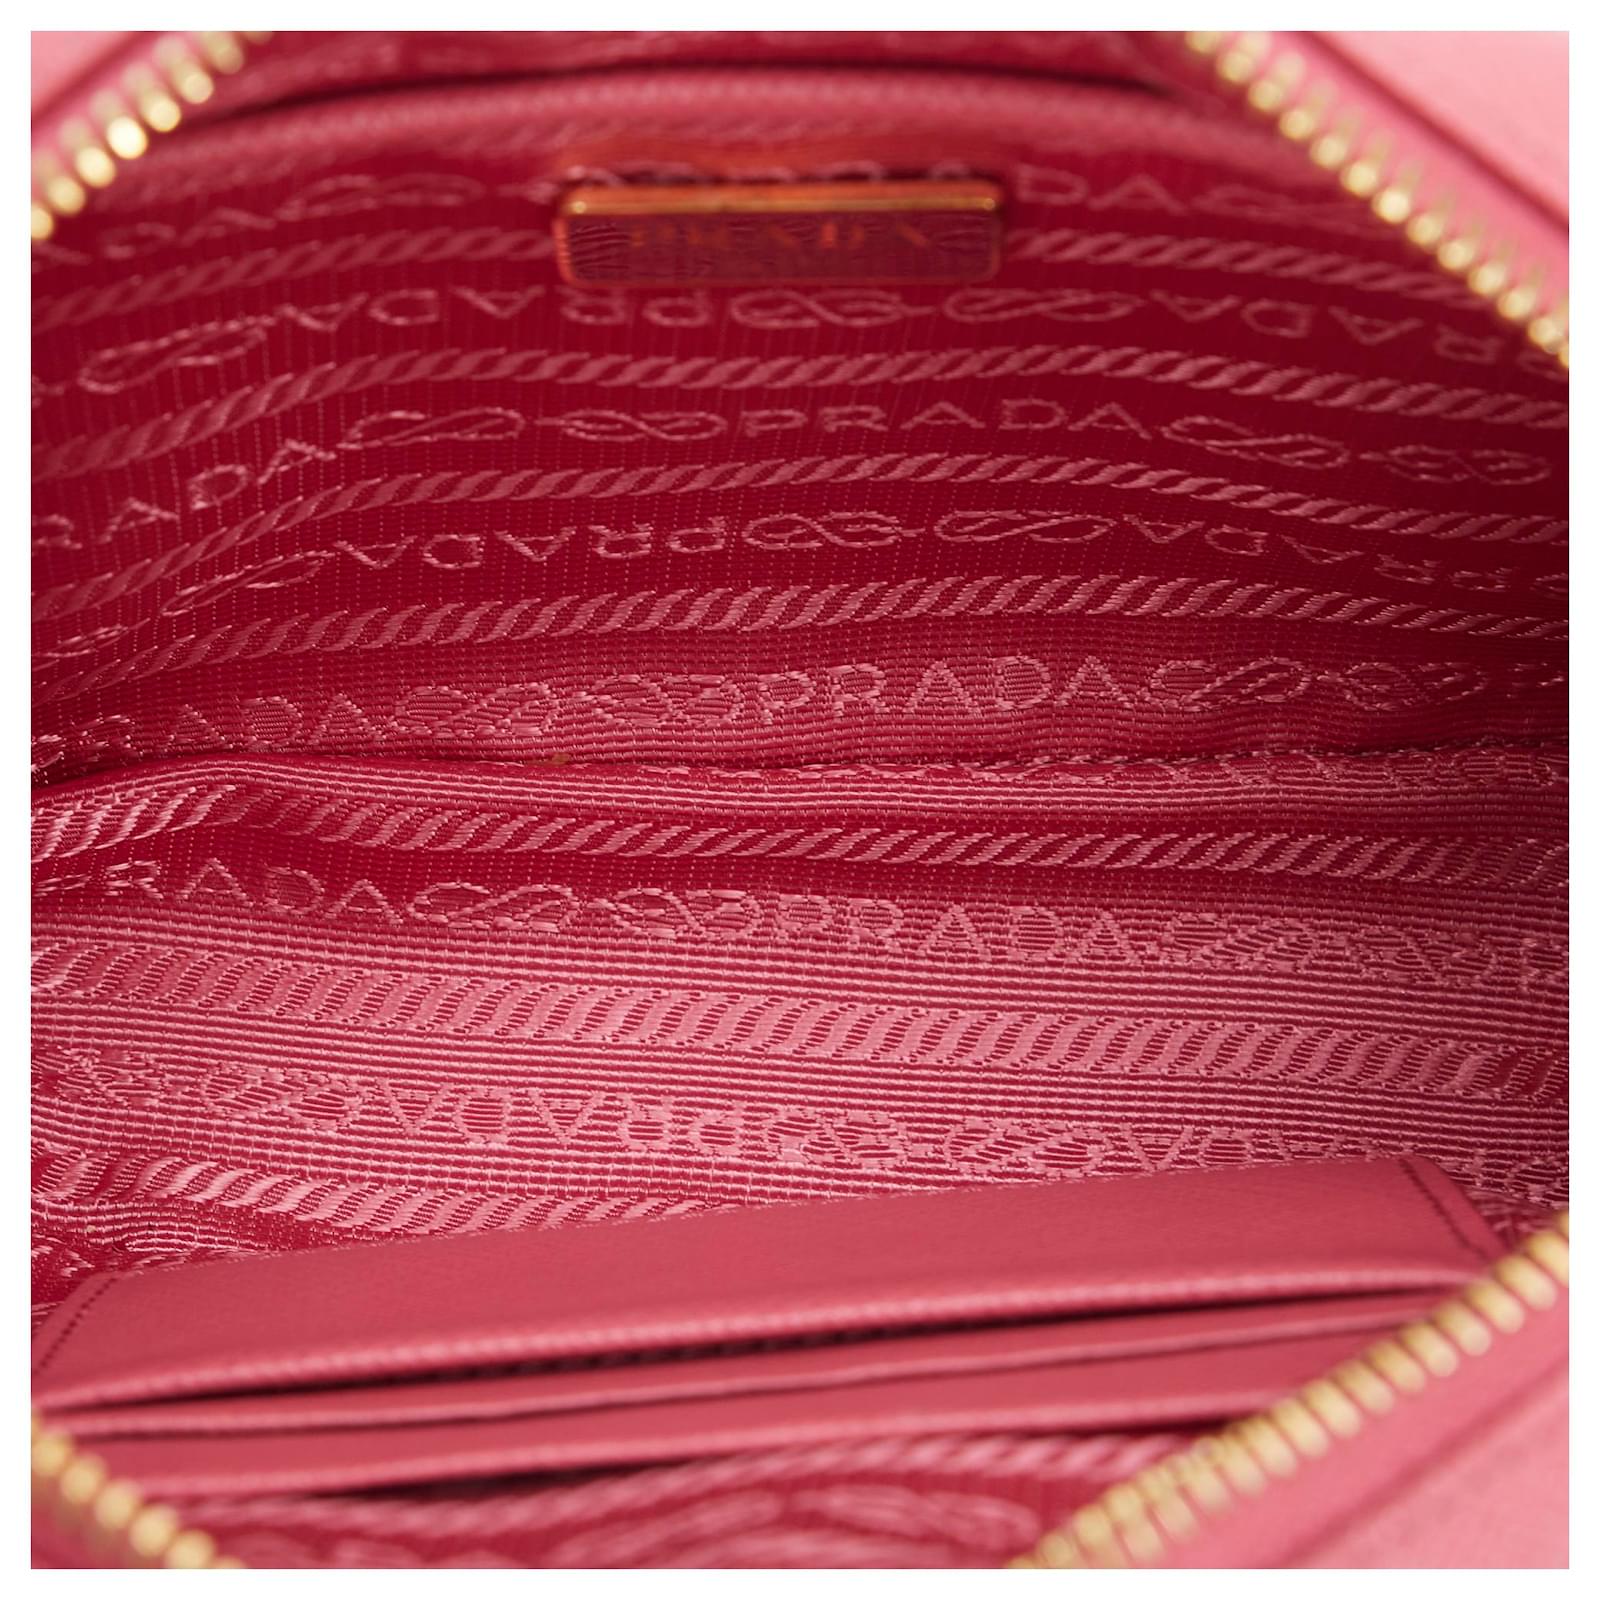 Prada Pink Saffiano Vernice Leather Flap Wallet On Strap